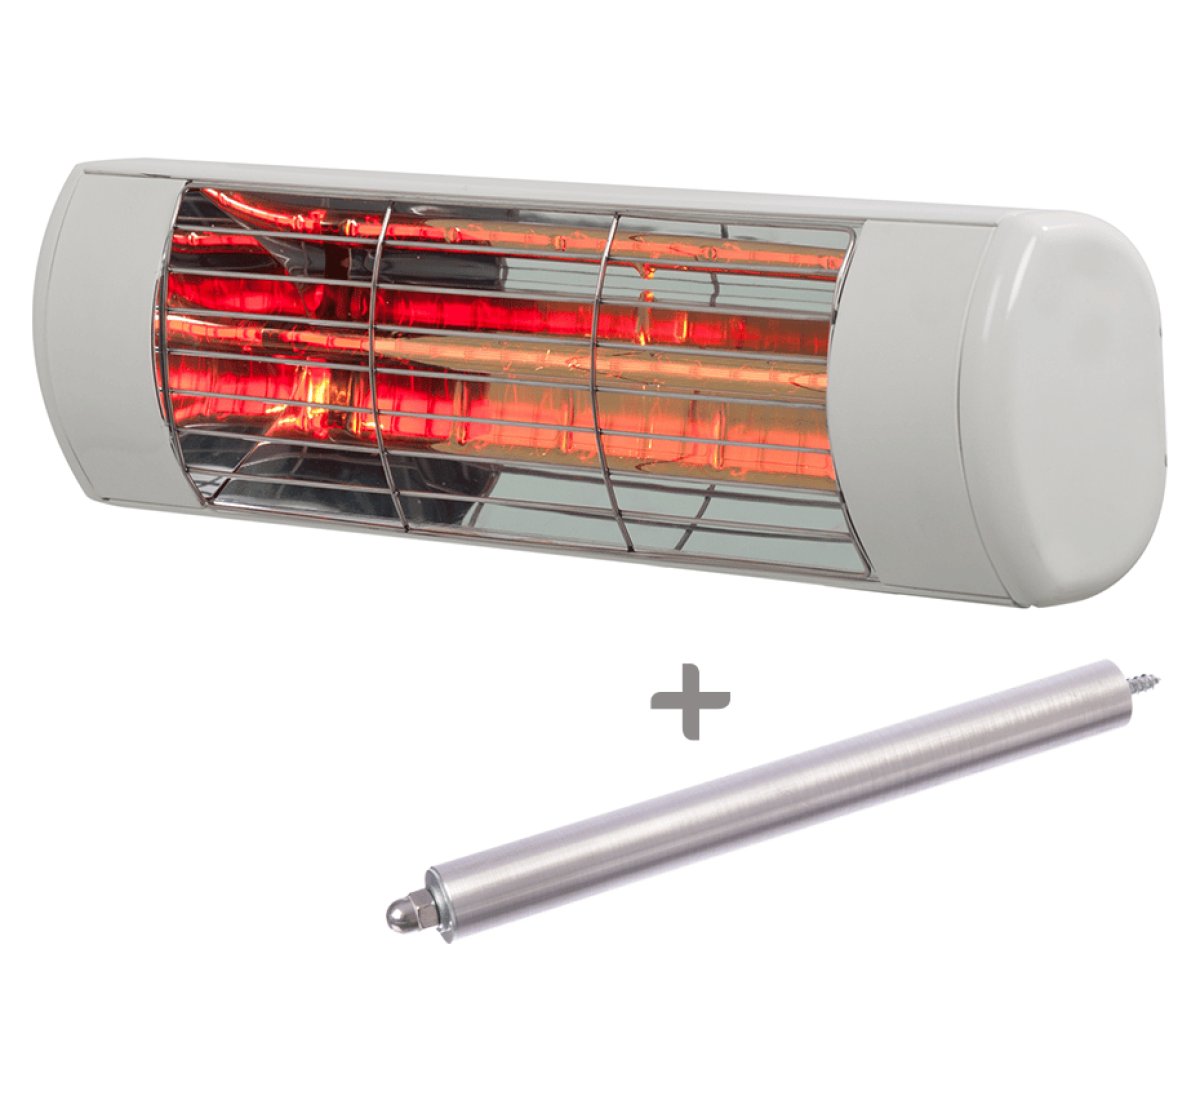 Toolow_Harco_heater_harcosun_pin-heater_WIT